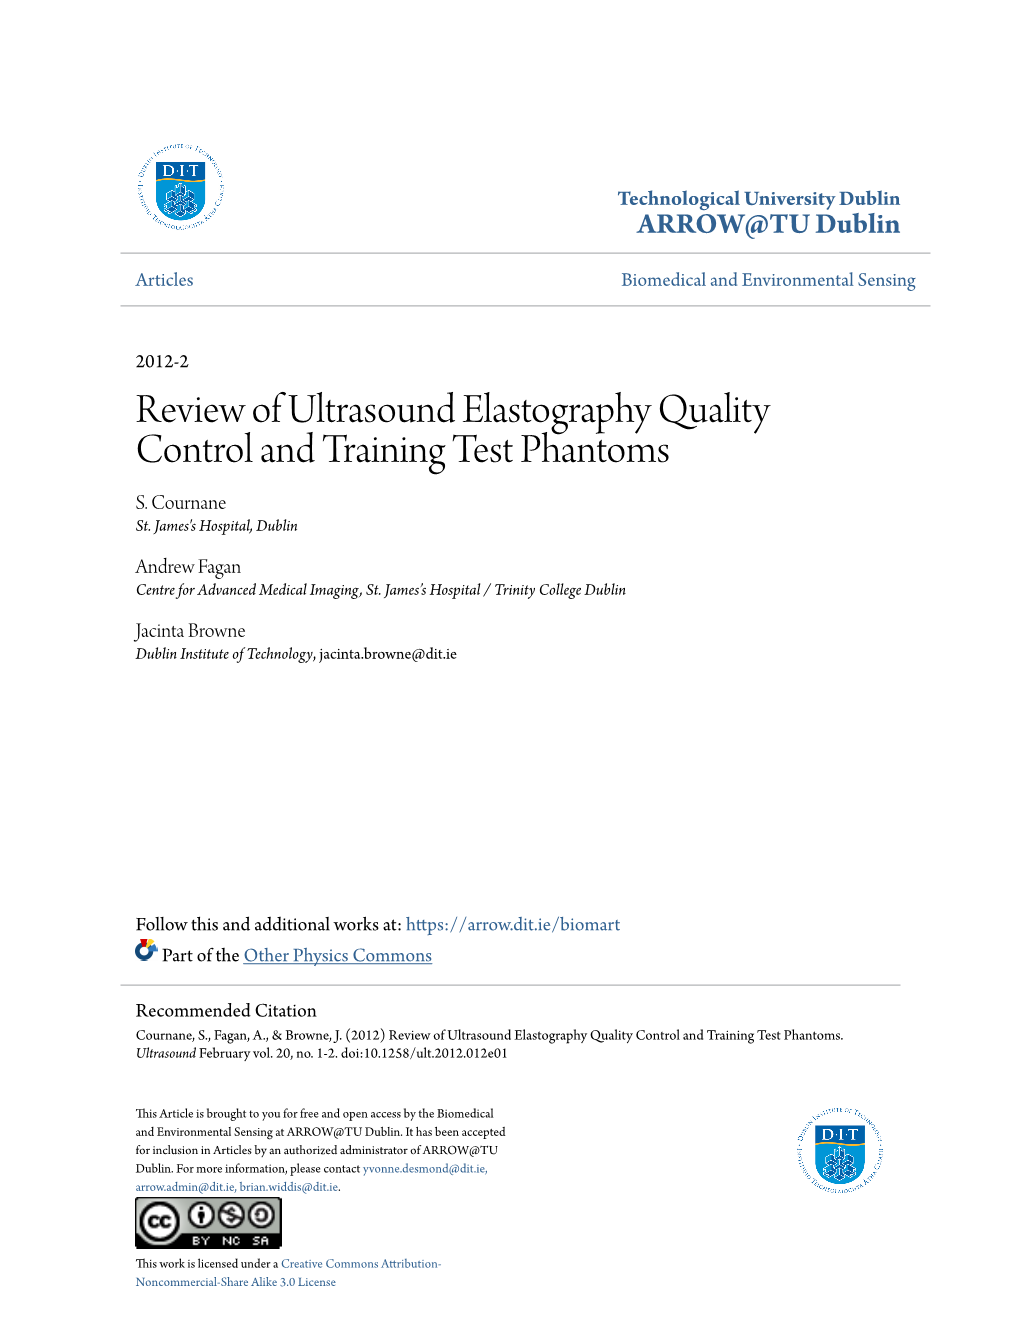 Review of Ultrasound Elastography Quality Control and Training Test Phantoms S